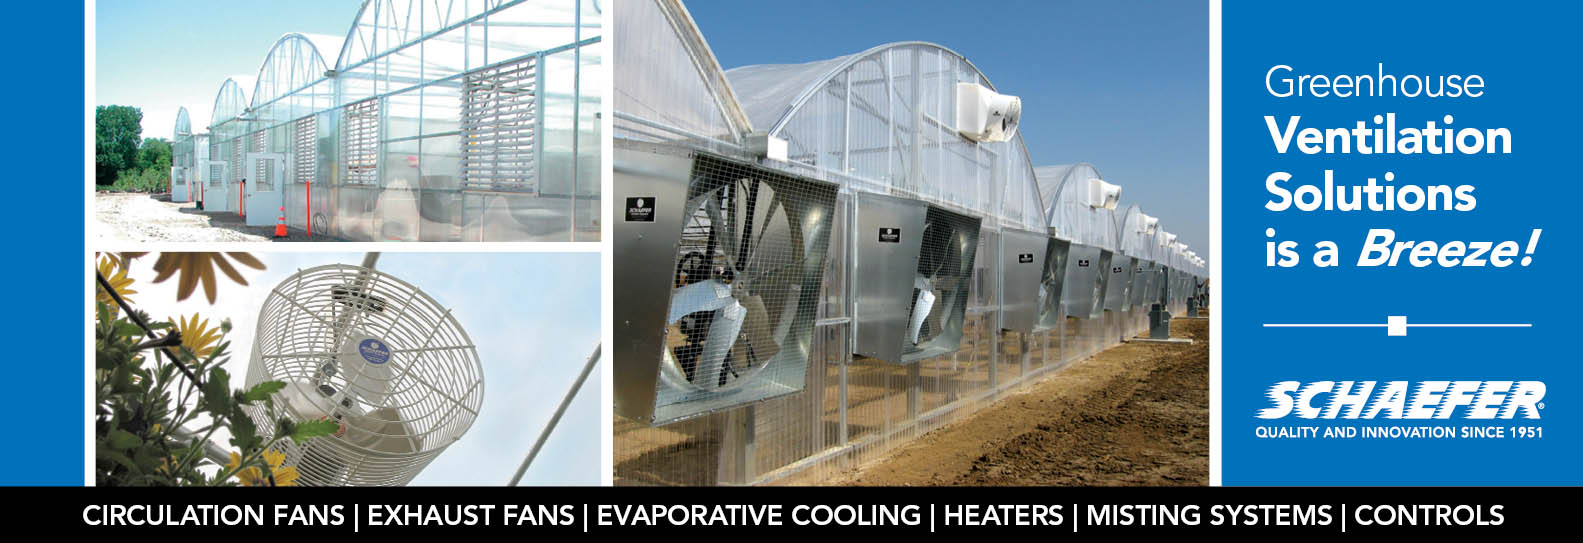 Schaefer – Greenhouse Ventilation Solutions is a Breeze. Circulation Fans, Exhaust Fans, Evaporation Cooling, Heaters, Misting Systems, Controls